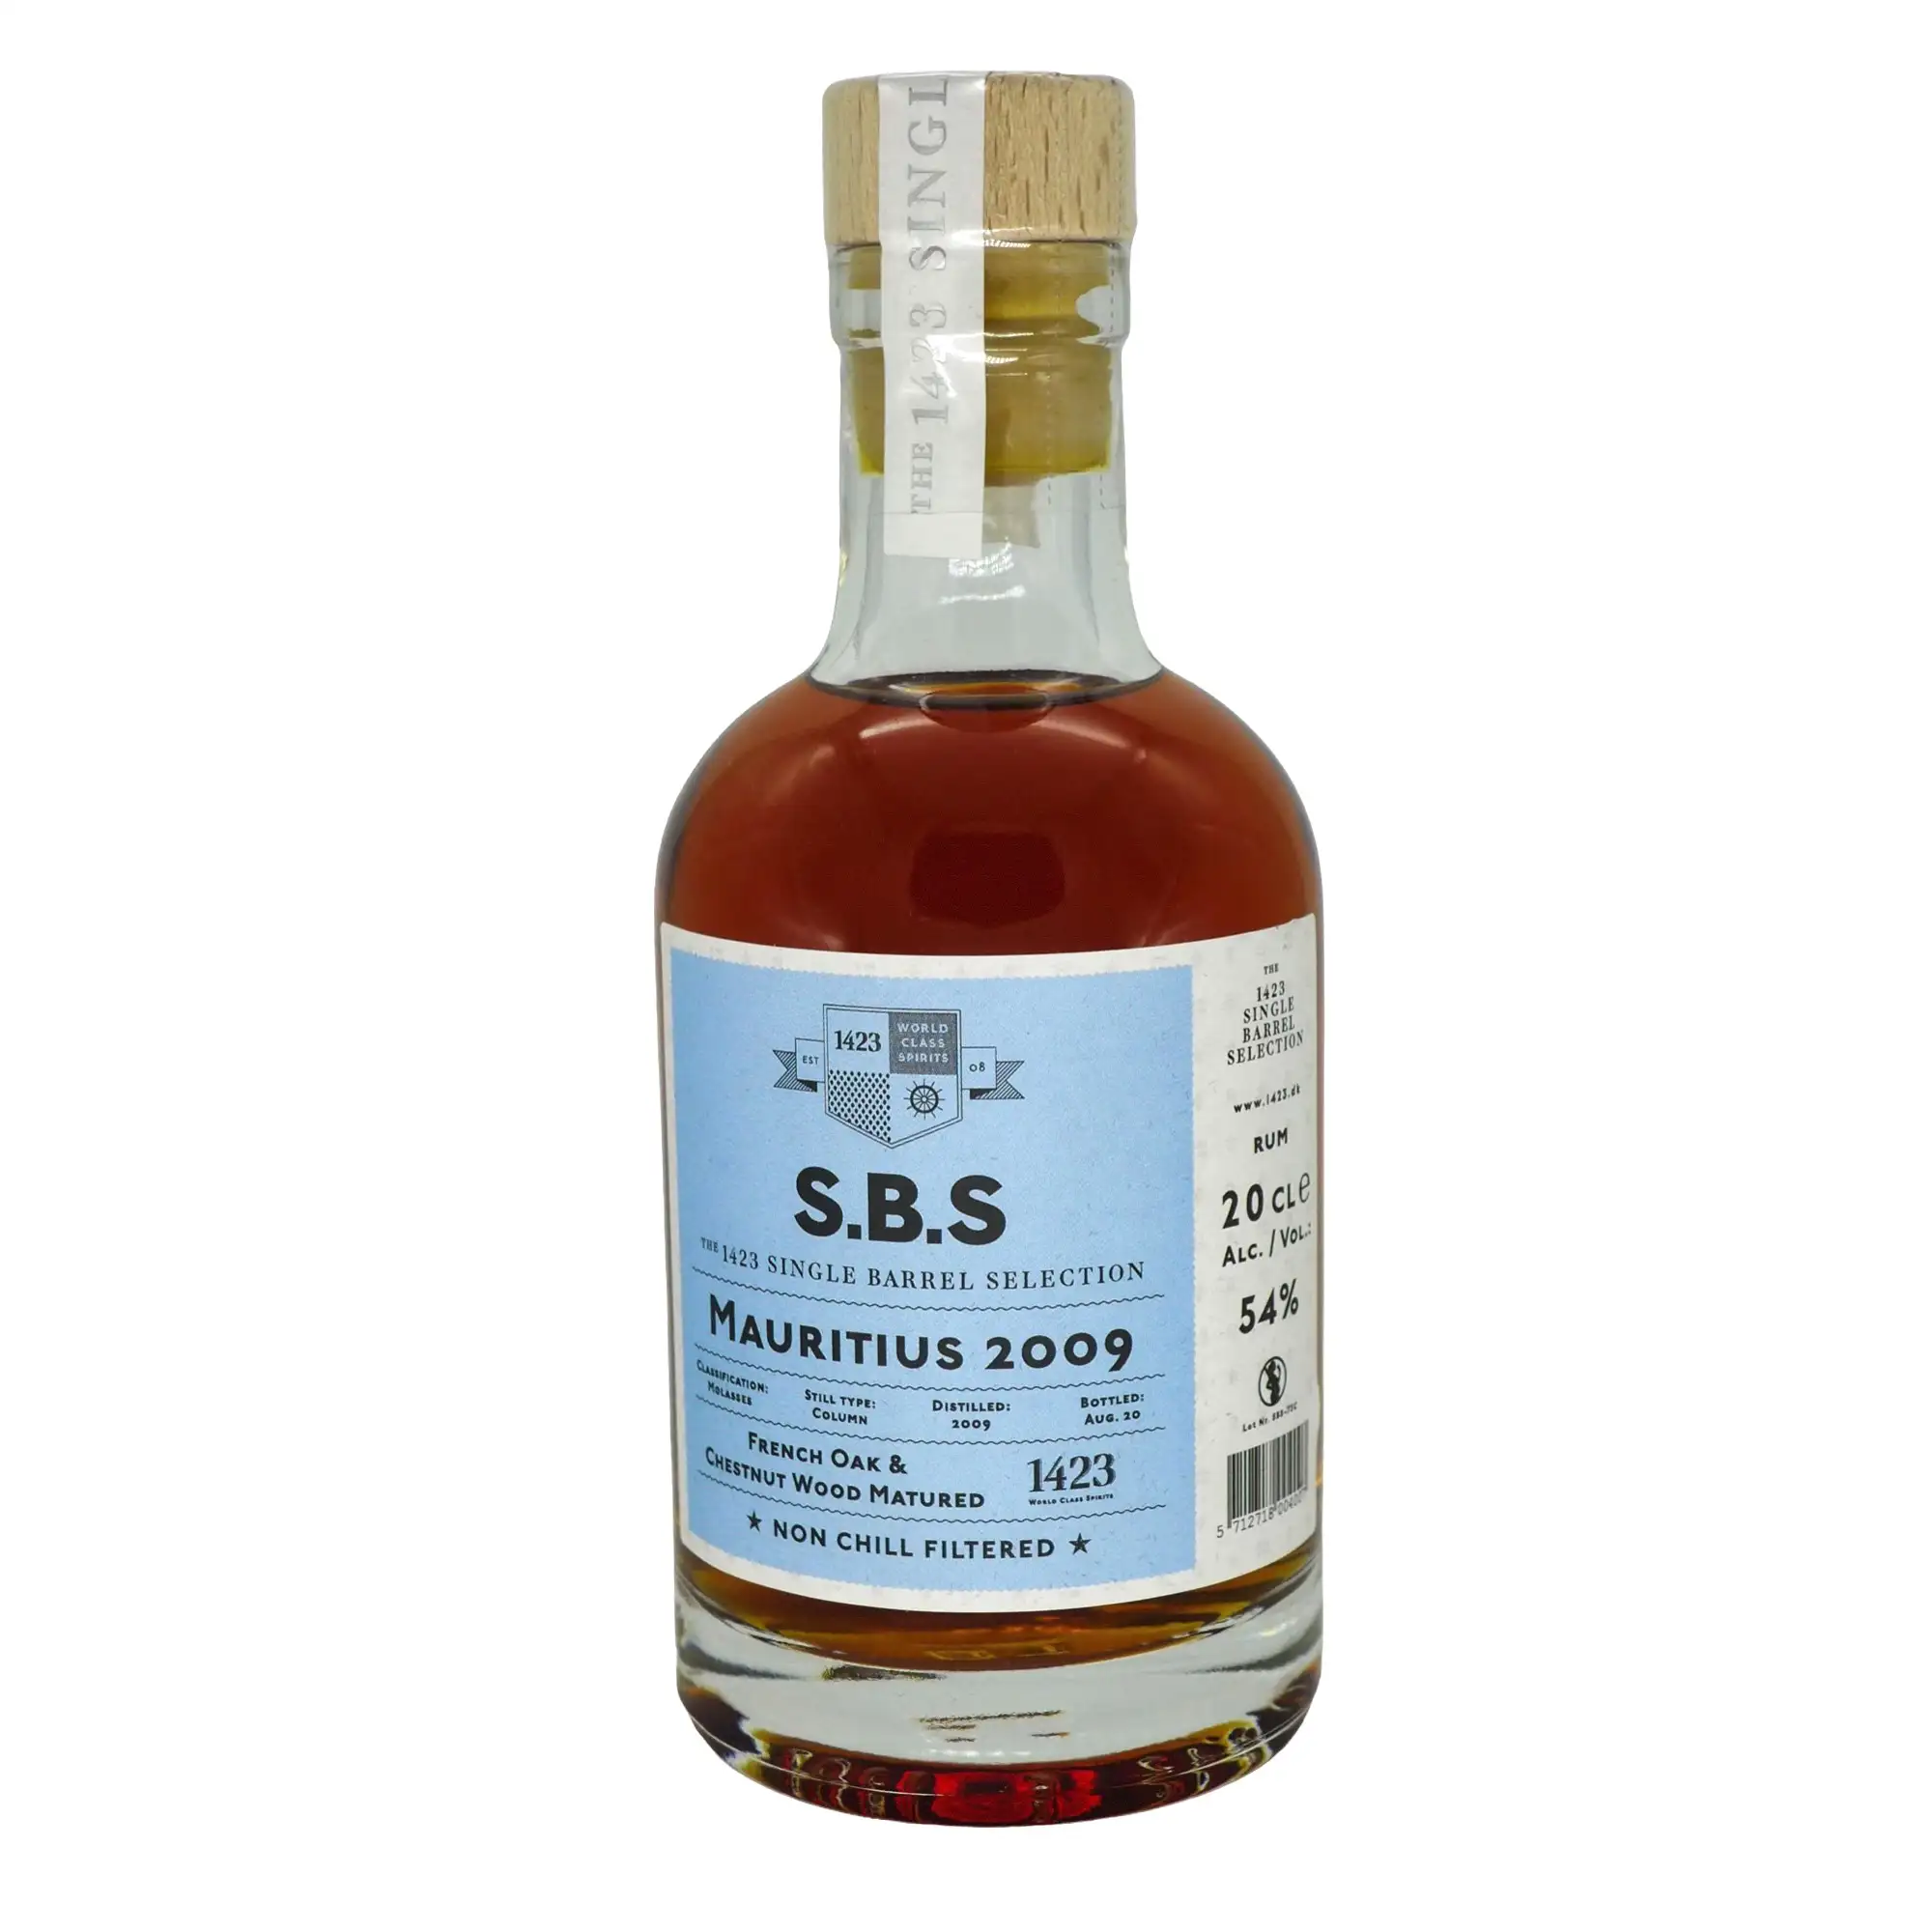 Image of the front of the bottle of the rum S.B.S Mauritius French Oak & Chestnut Wood